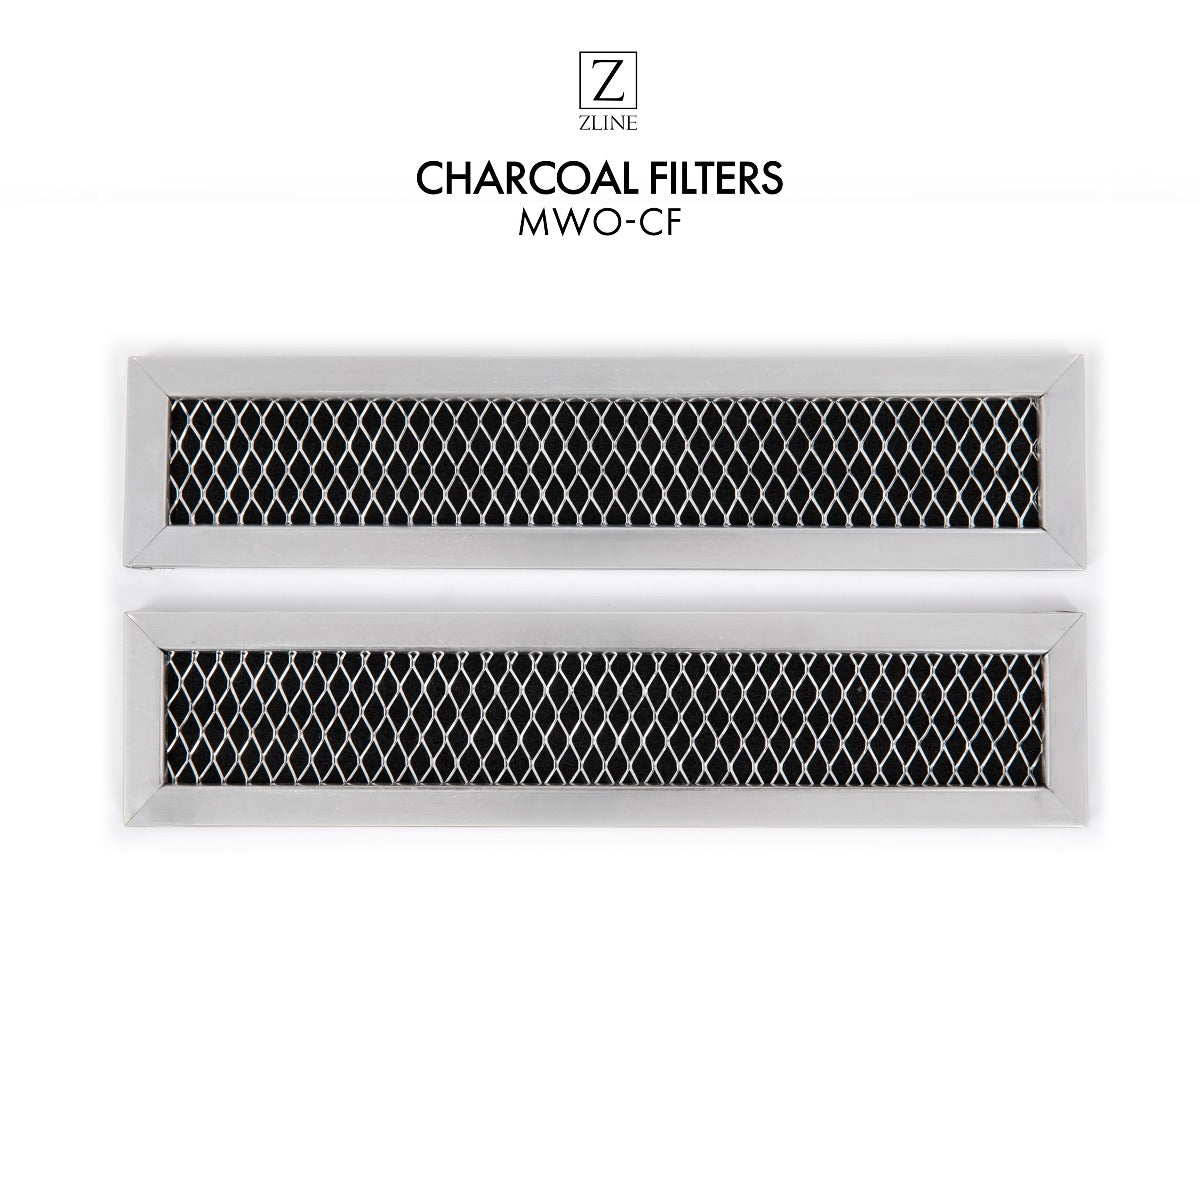 ZLINE Over the Range Microwave Charcoal Filters, MWO-CF